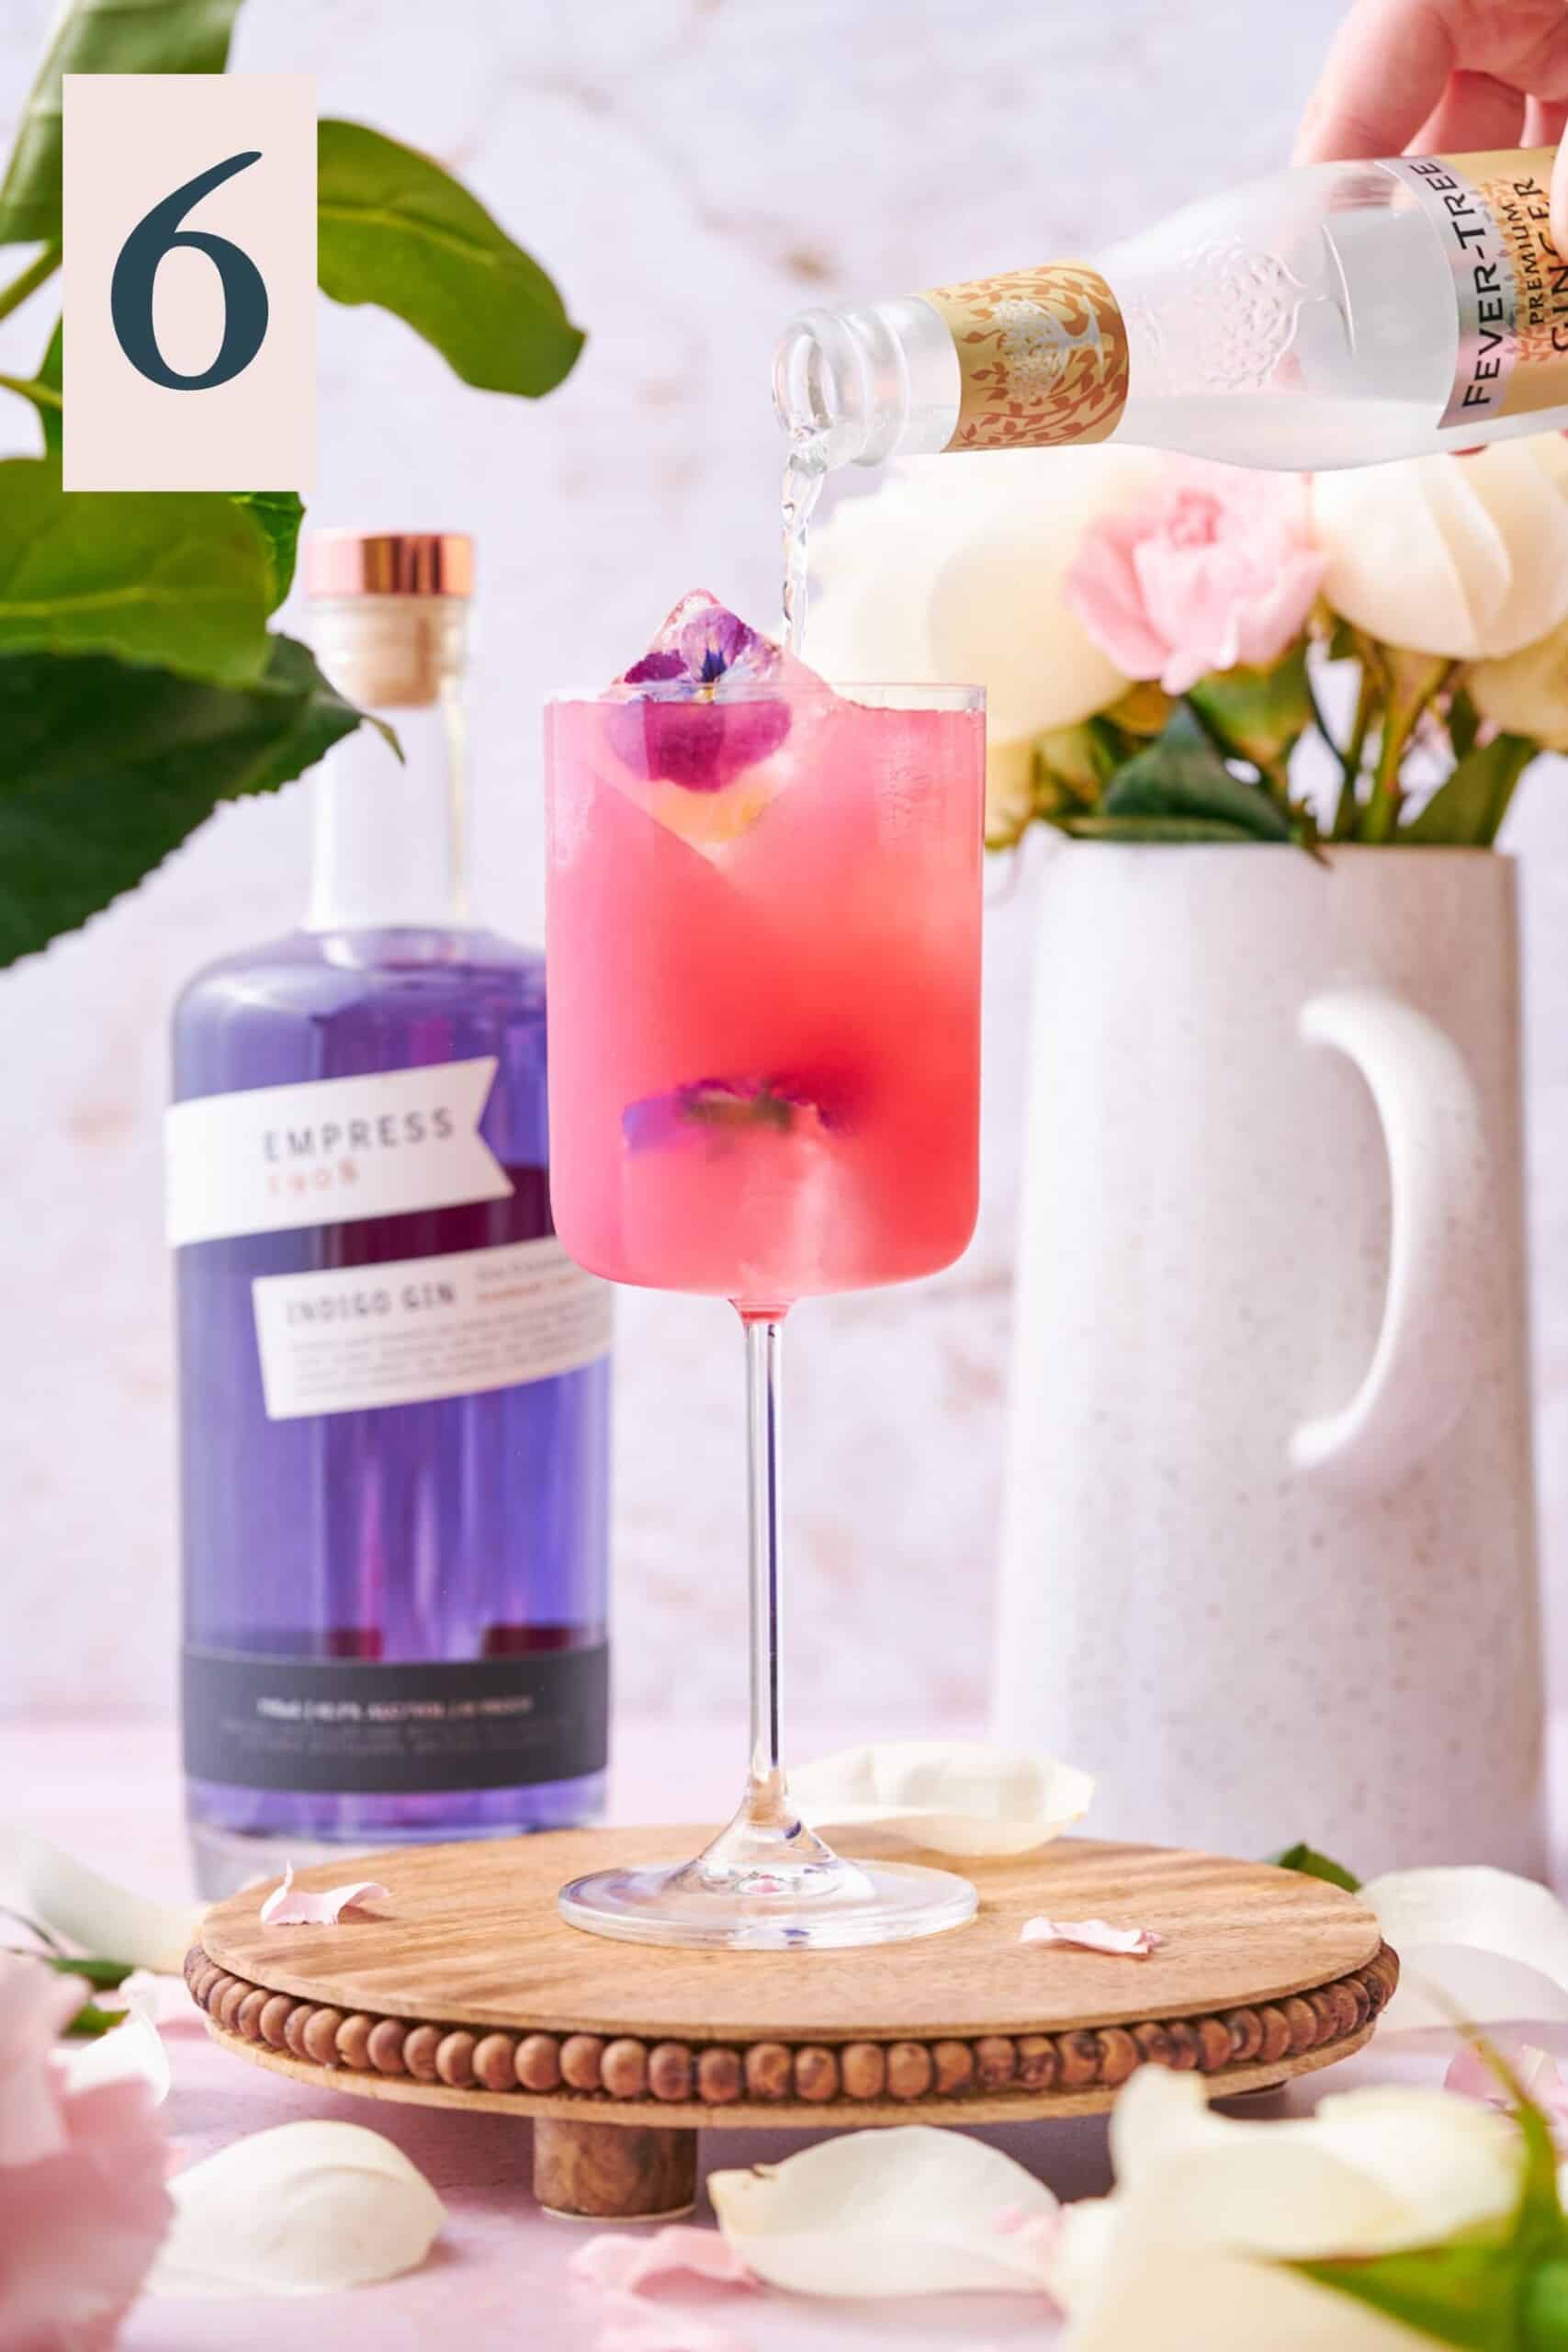 pouring ginger beer into a bright pink Floradora cocktail, with a bottle of indigo Empress gin in the background, and white and pink flowers.